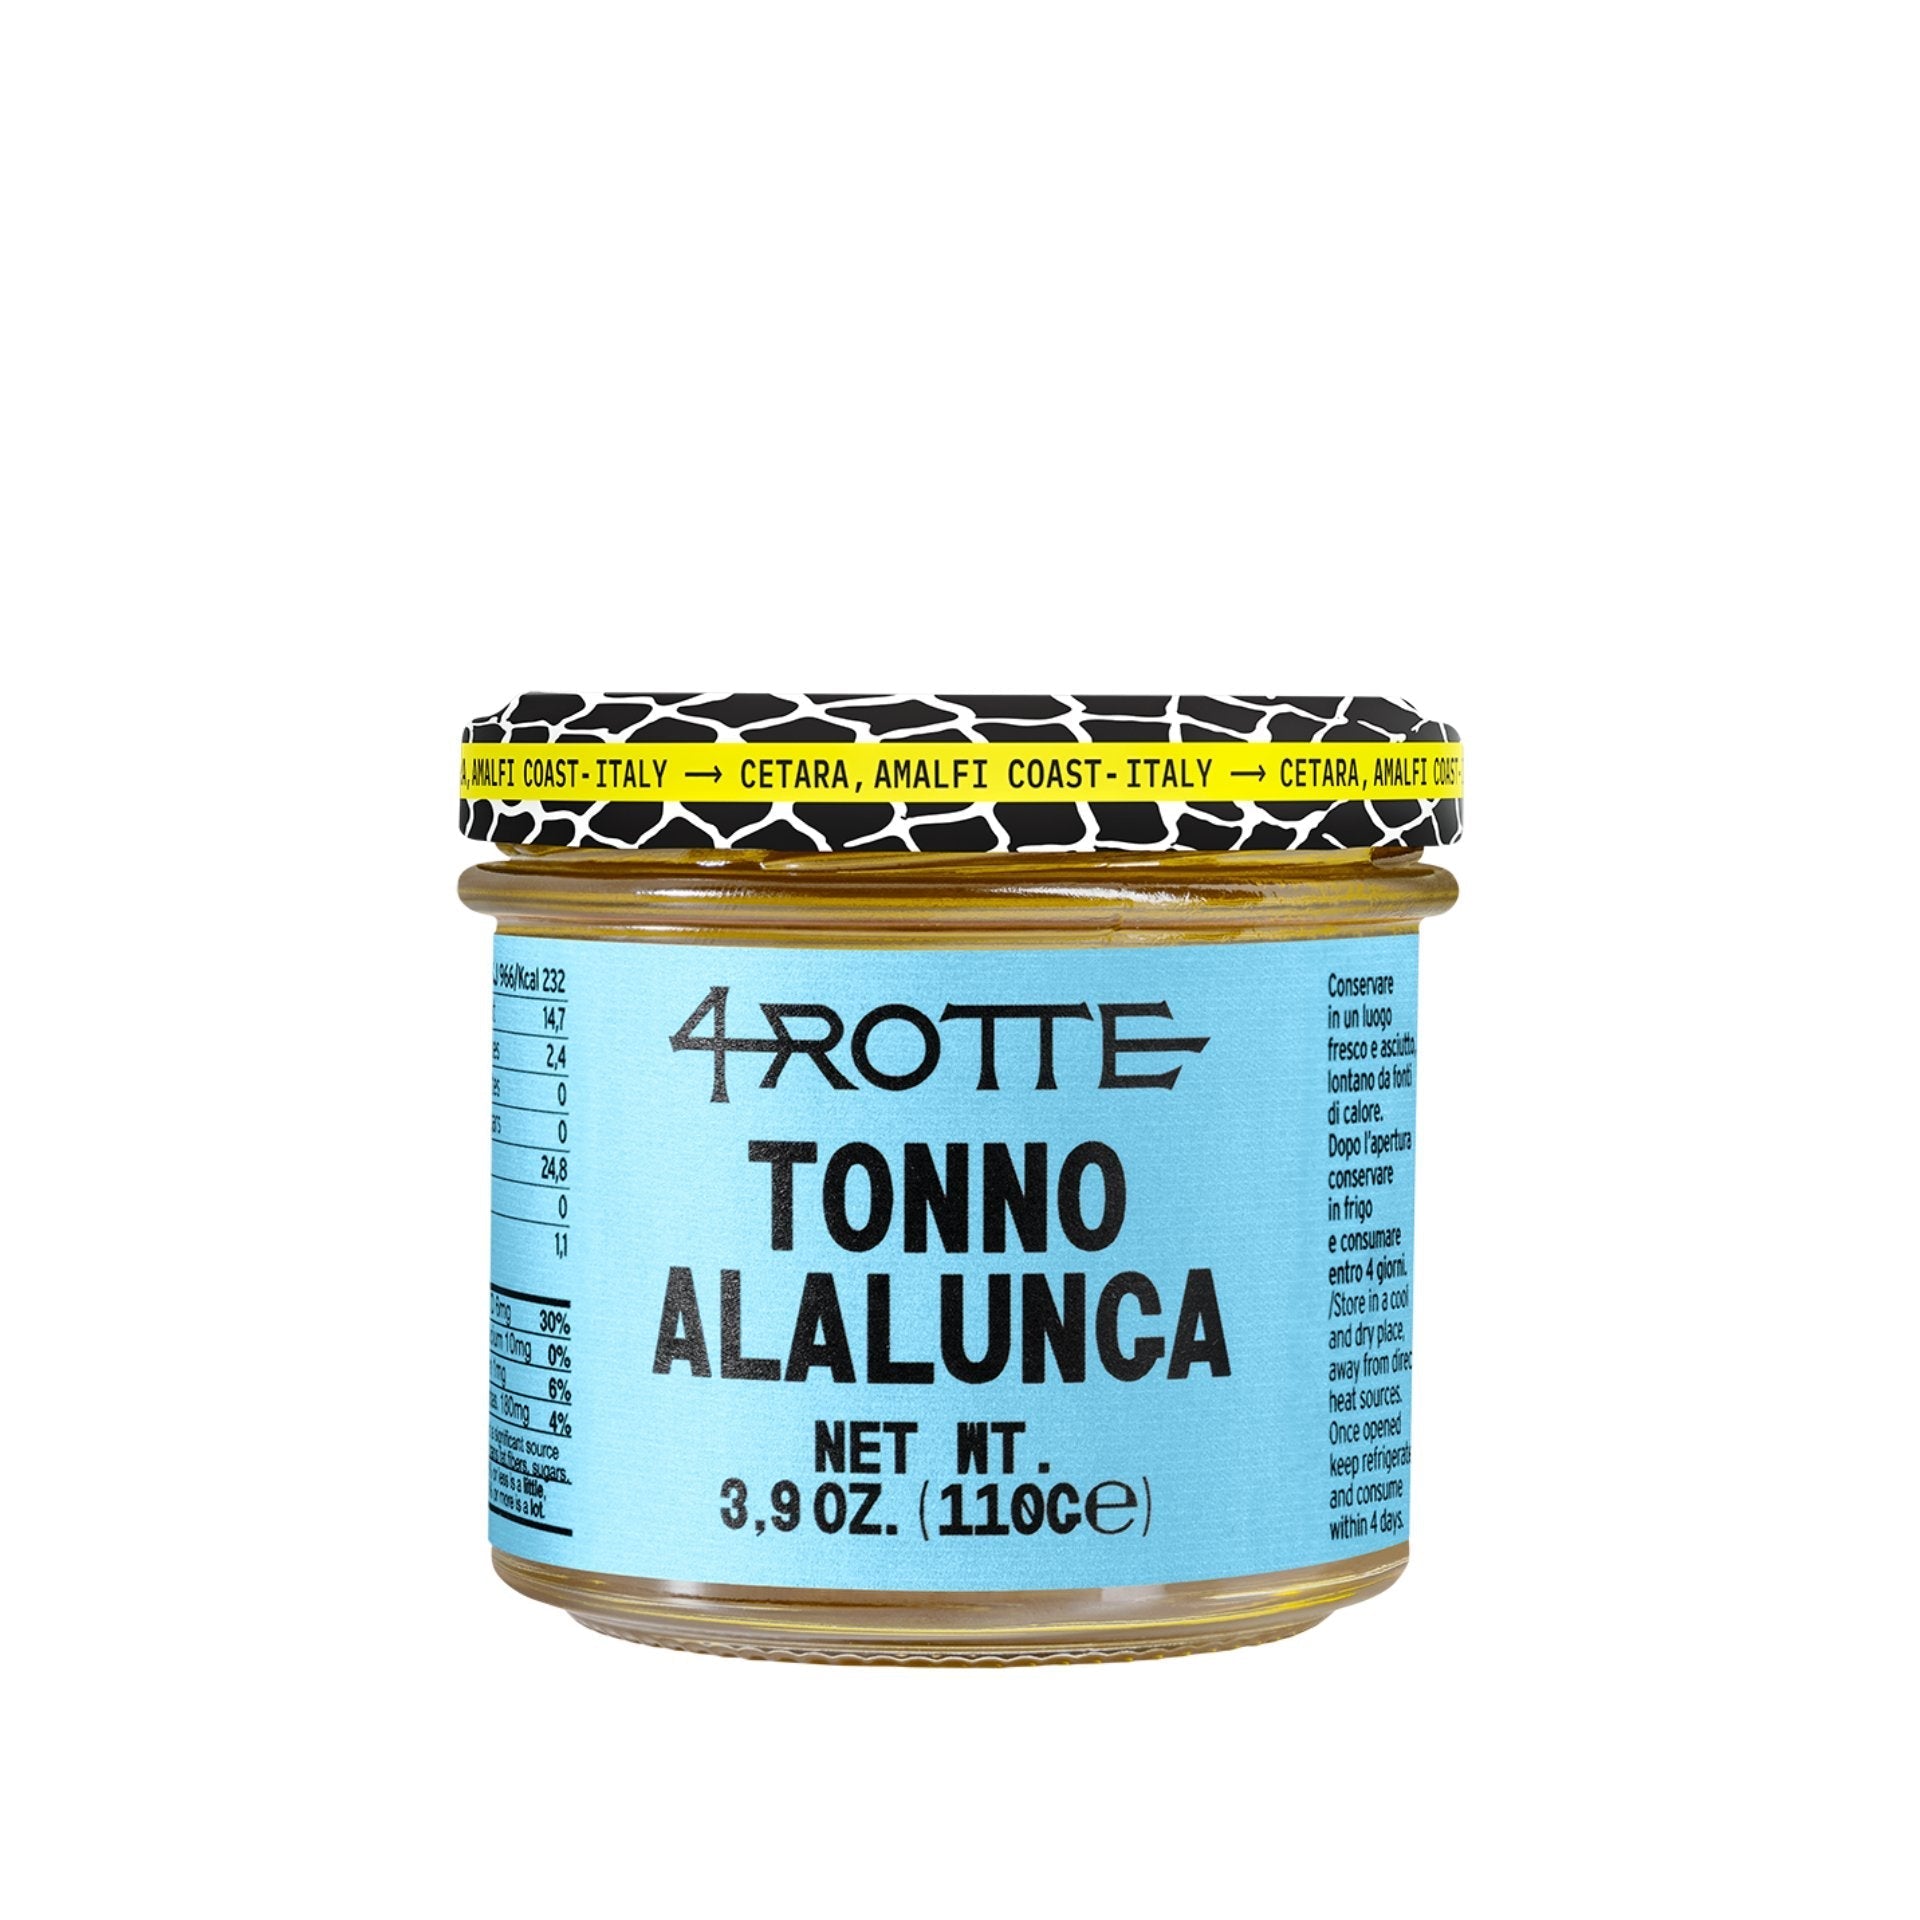 Armatore 4 Rotte Tuna Albacore / White Tuna in Olive Oil 110g  | Imported and distributed in the UK by Just Gourmet Foods